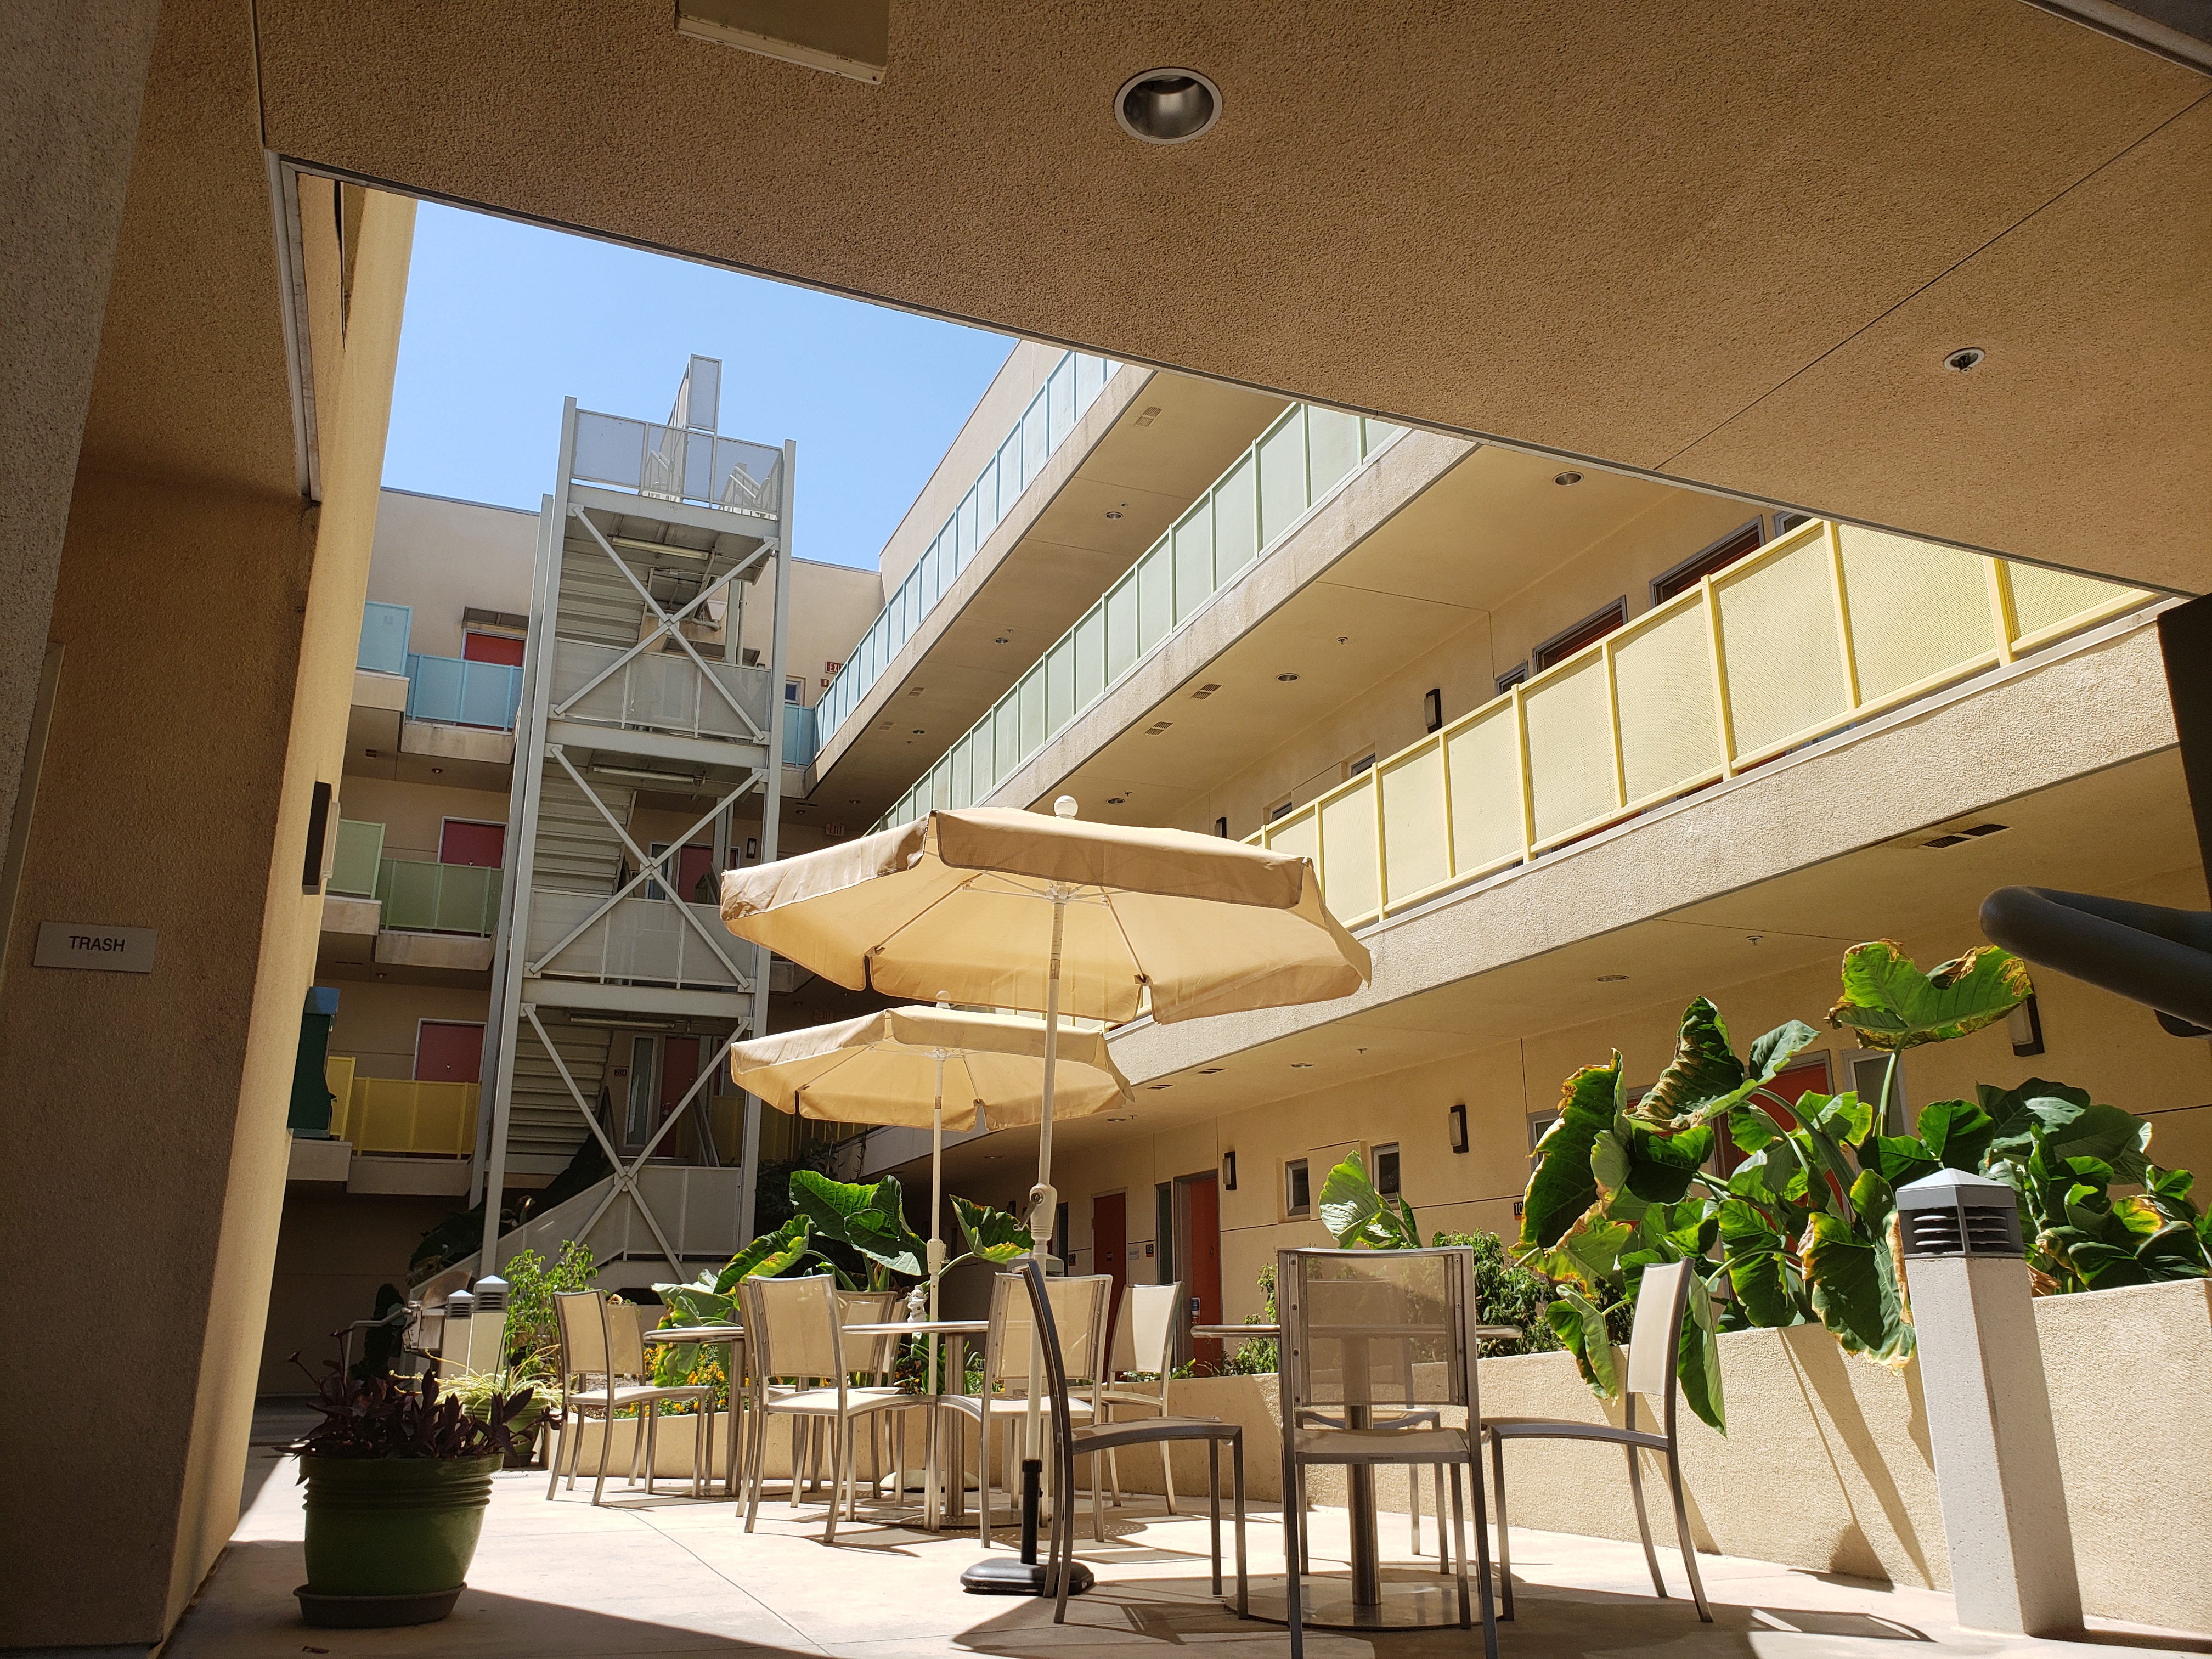 patio view. patio tables with umbrellas and chairs centered 
in the middle of three story building. Planters along side 
seating area. View of stairs on the far end of seating area